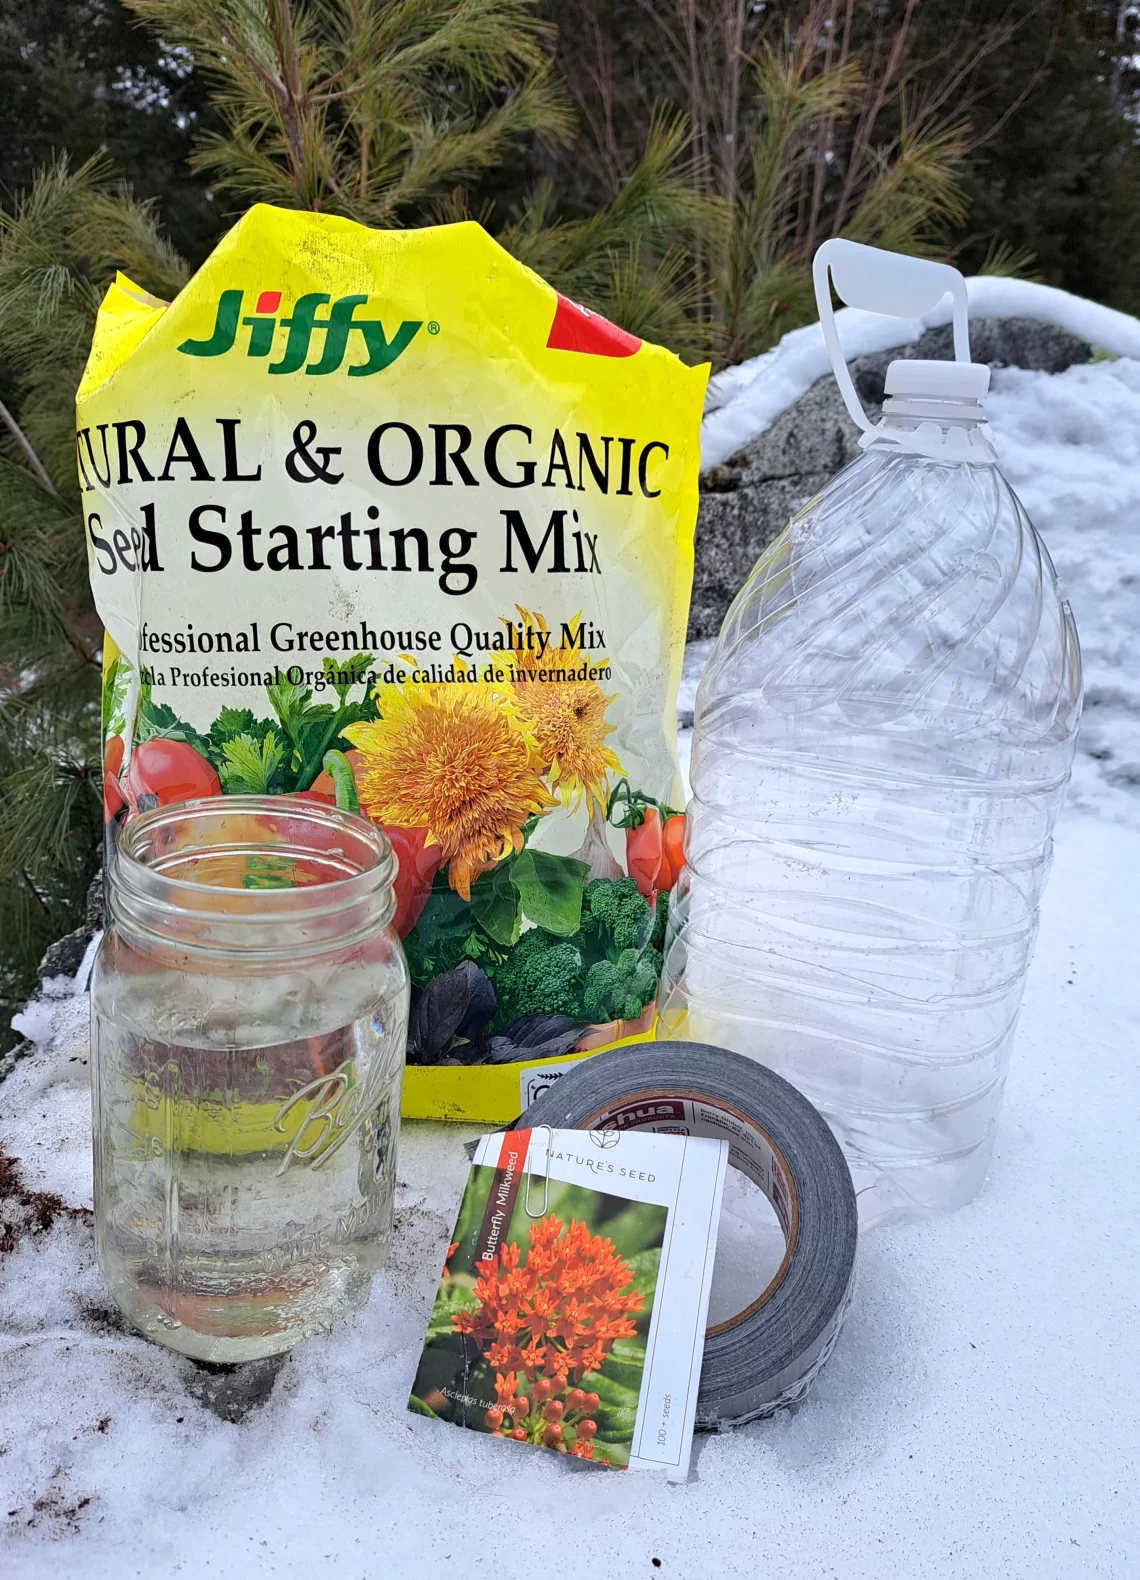 Make a milk jug greenhouse and cold stratify seeds outdoors in winter!